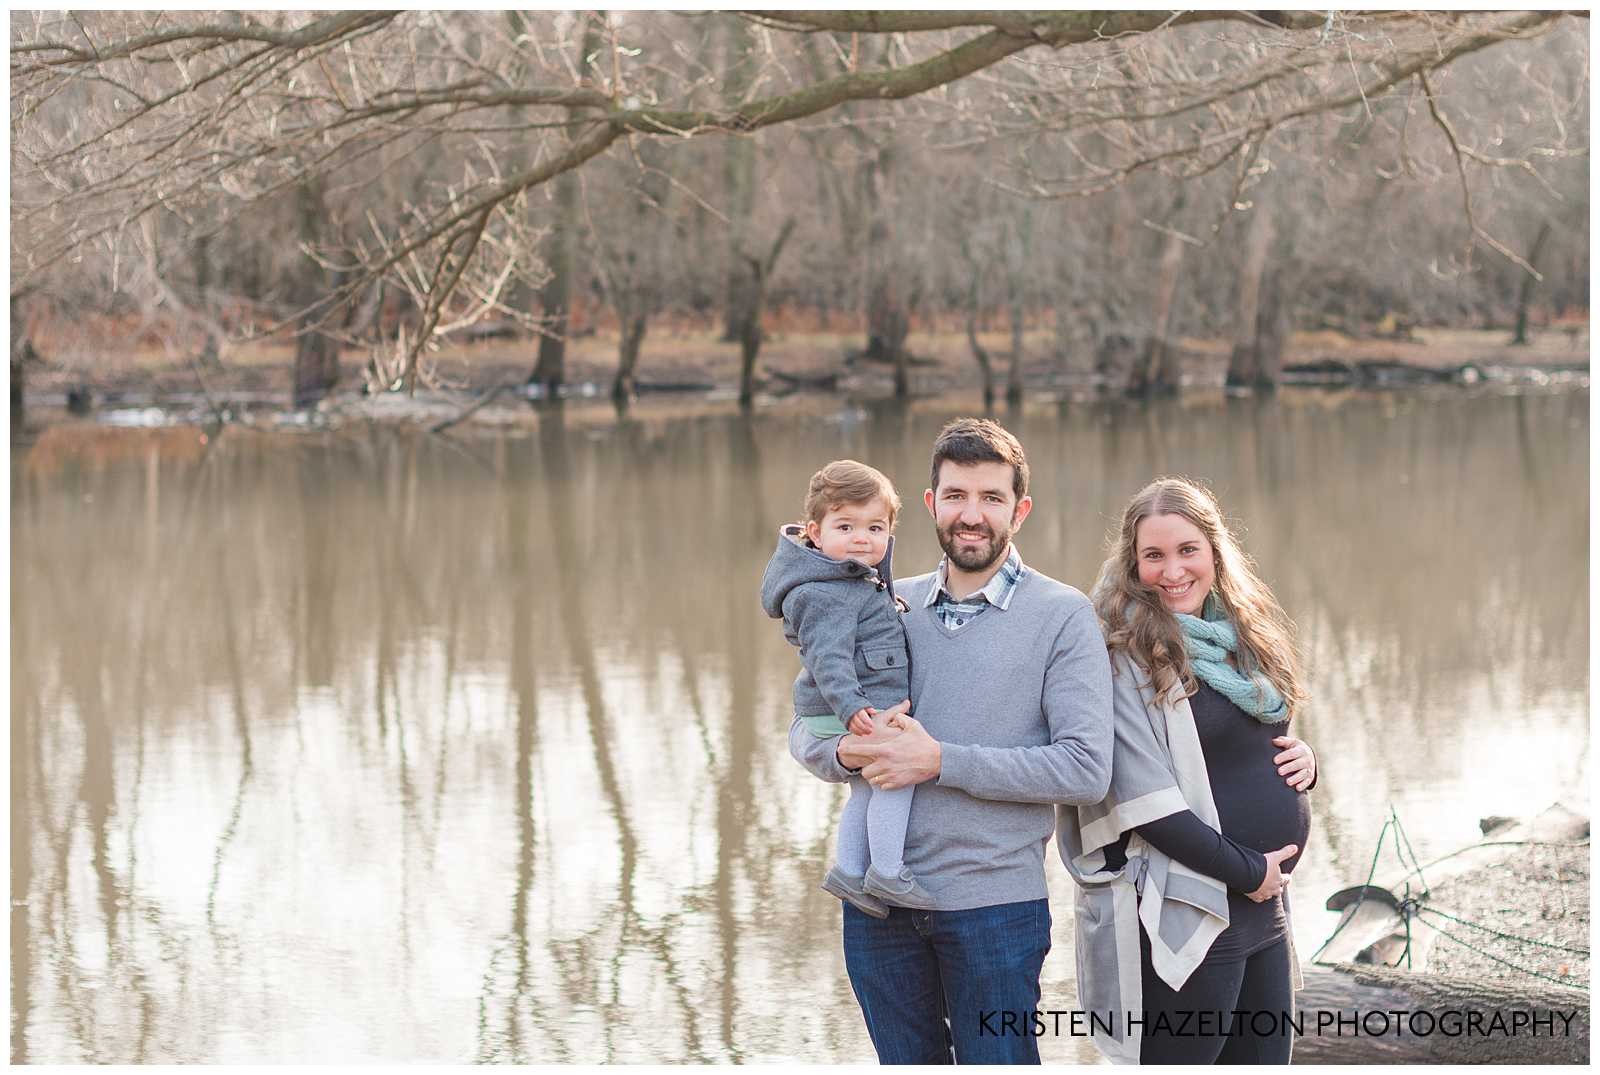 Family and maternity photos in River Forest, IL